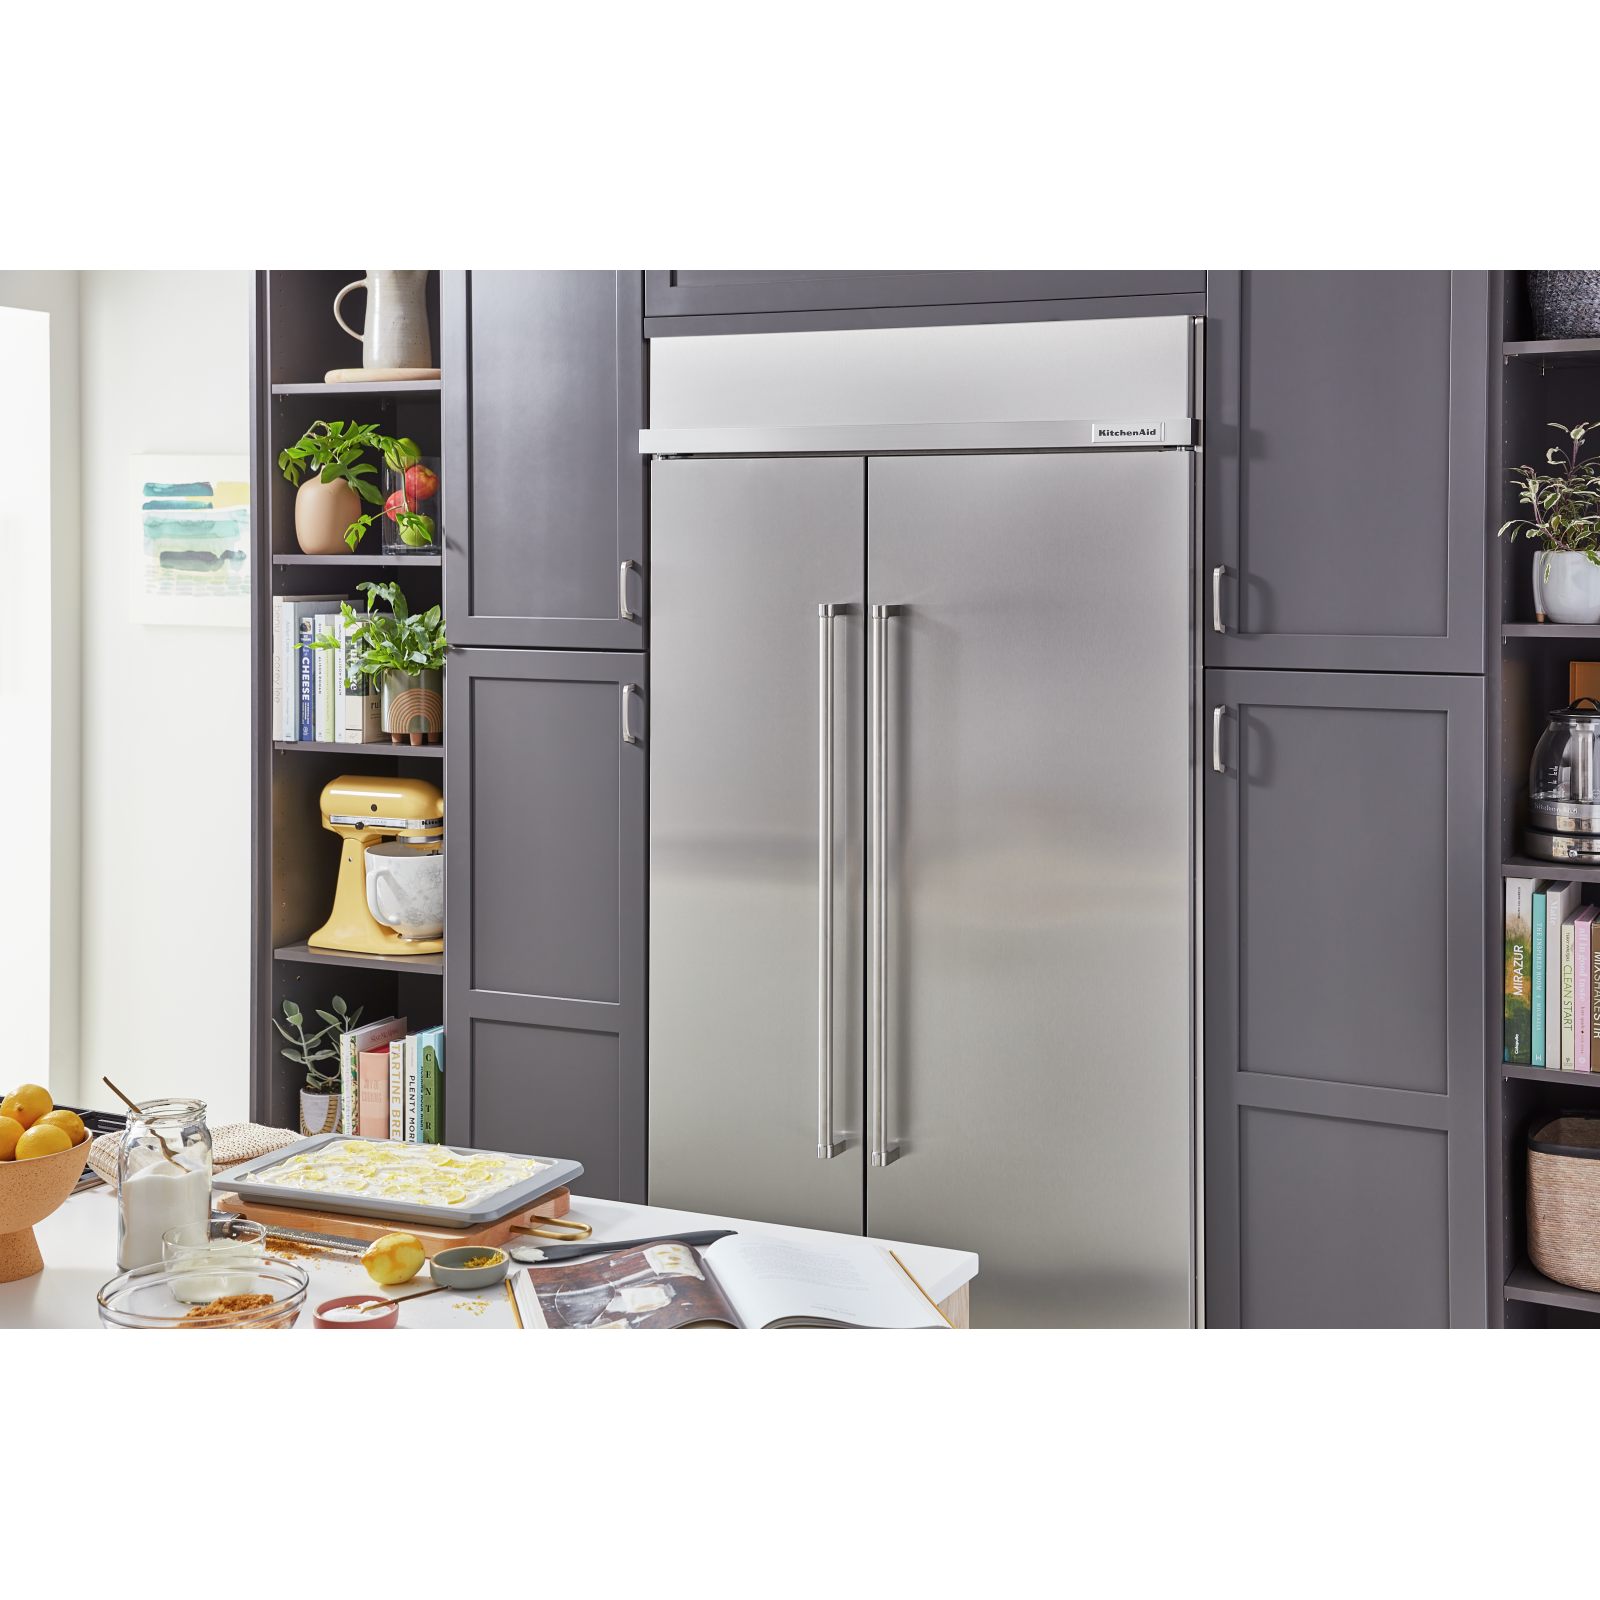 KitchenAid - 41.25 Inch 25.5 cu. ft Side-by-Side Refrigerator in Stainless - KBSN702MPS